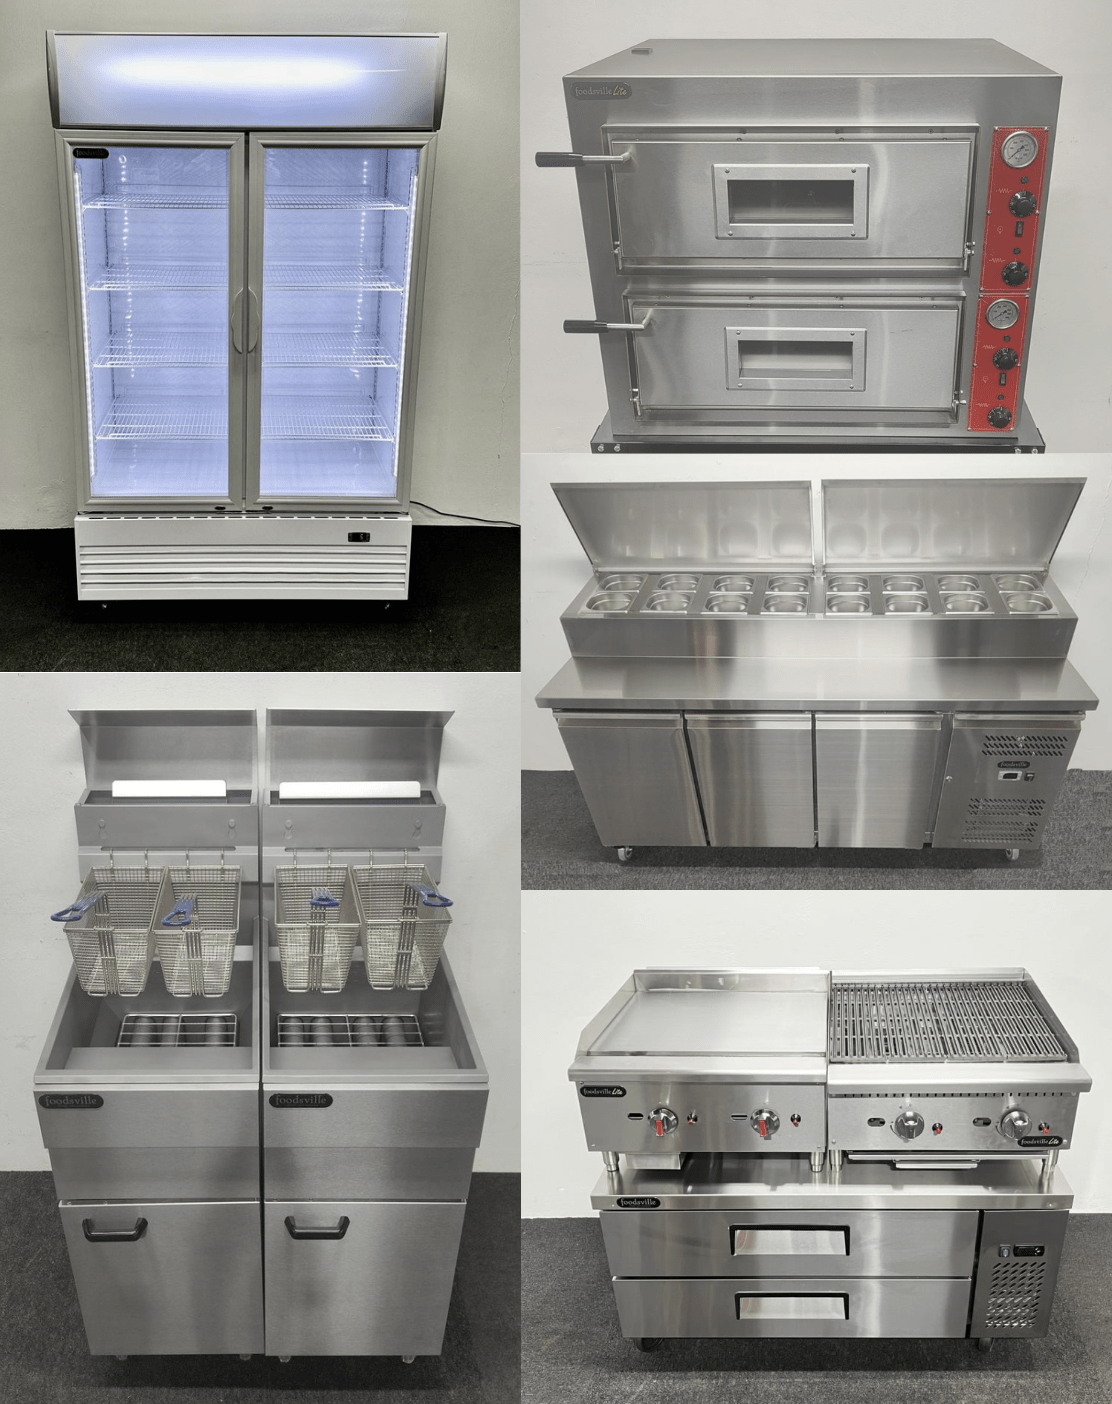 New Catering Equipment and Refrigeration